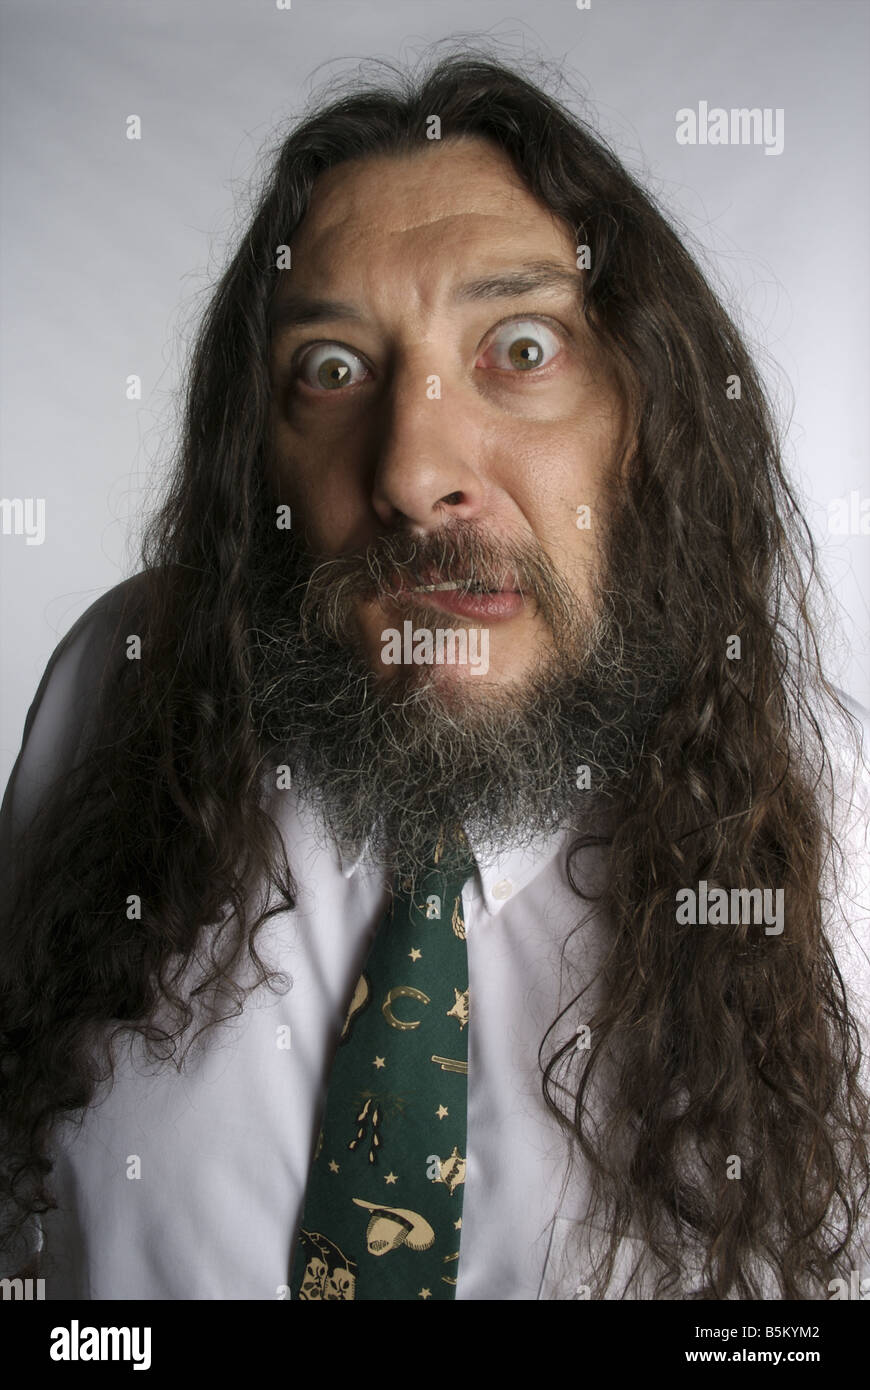 Man with long hair and beard wearing tie Stock Photo - Alamy